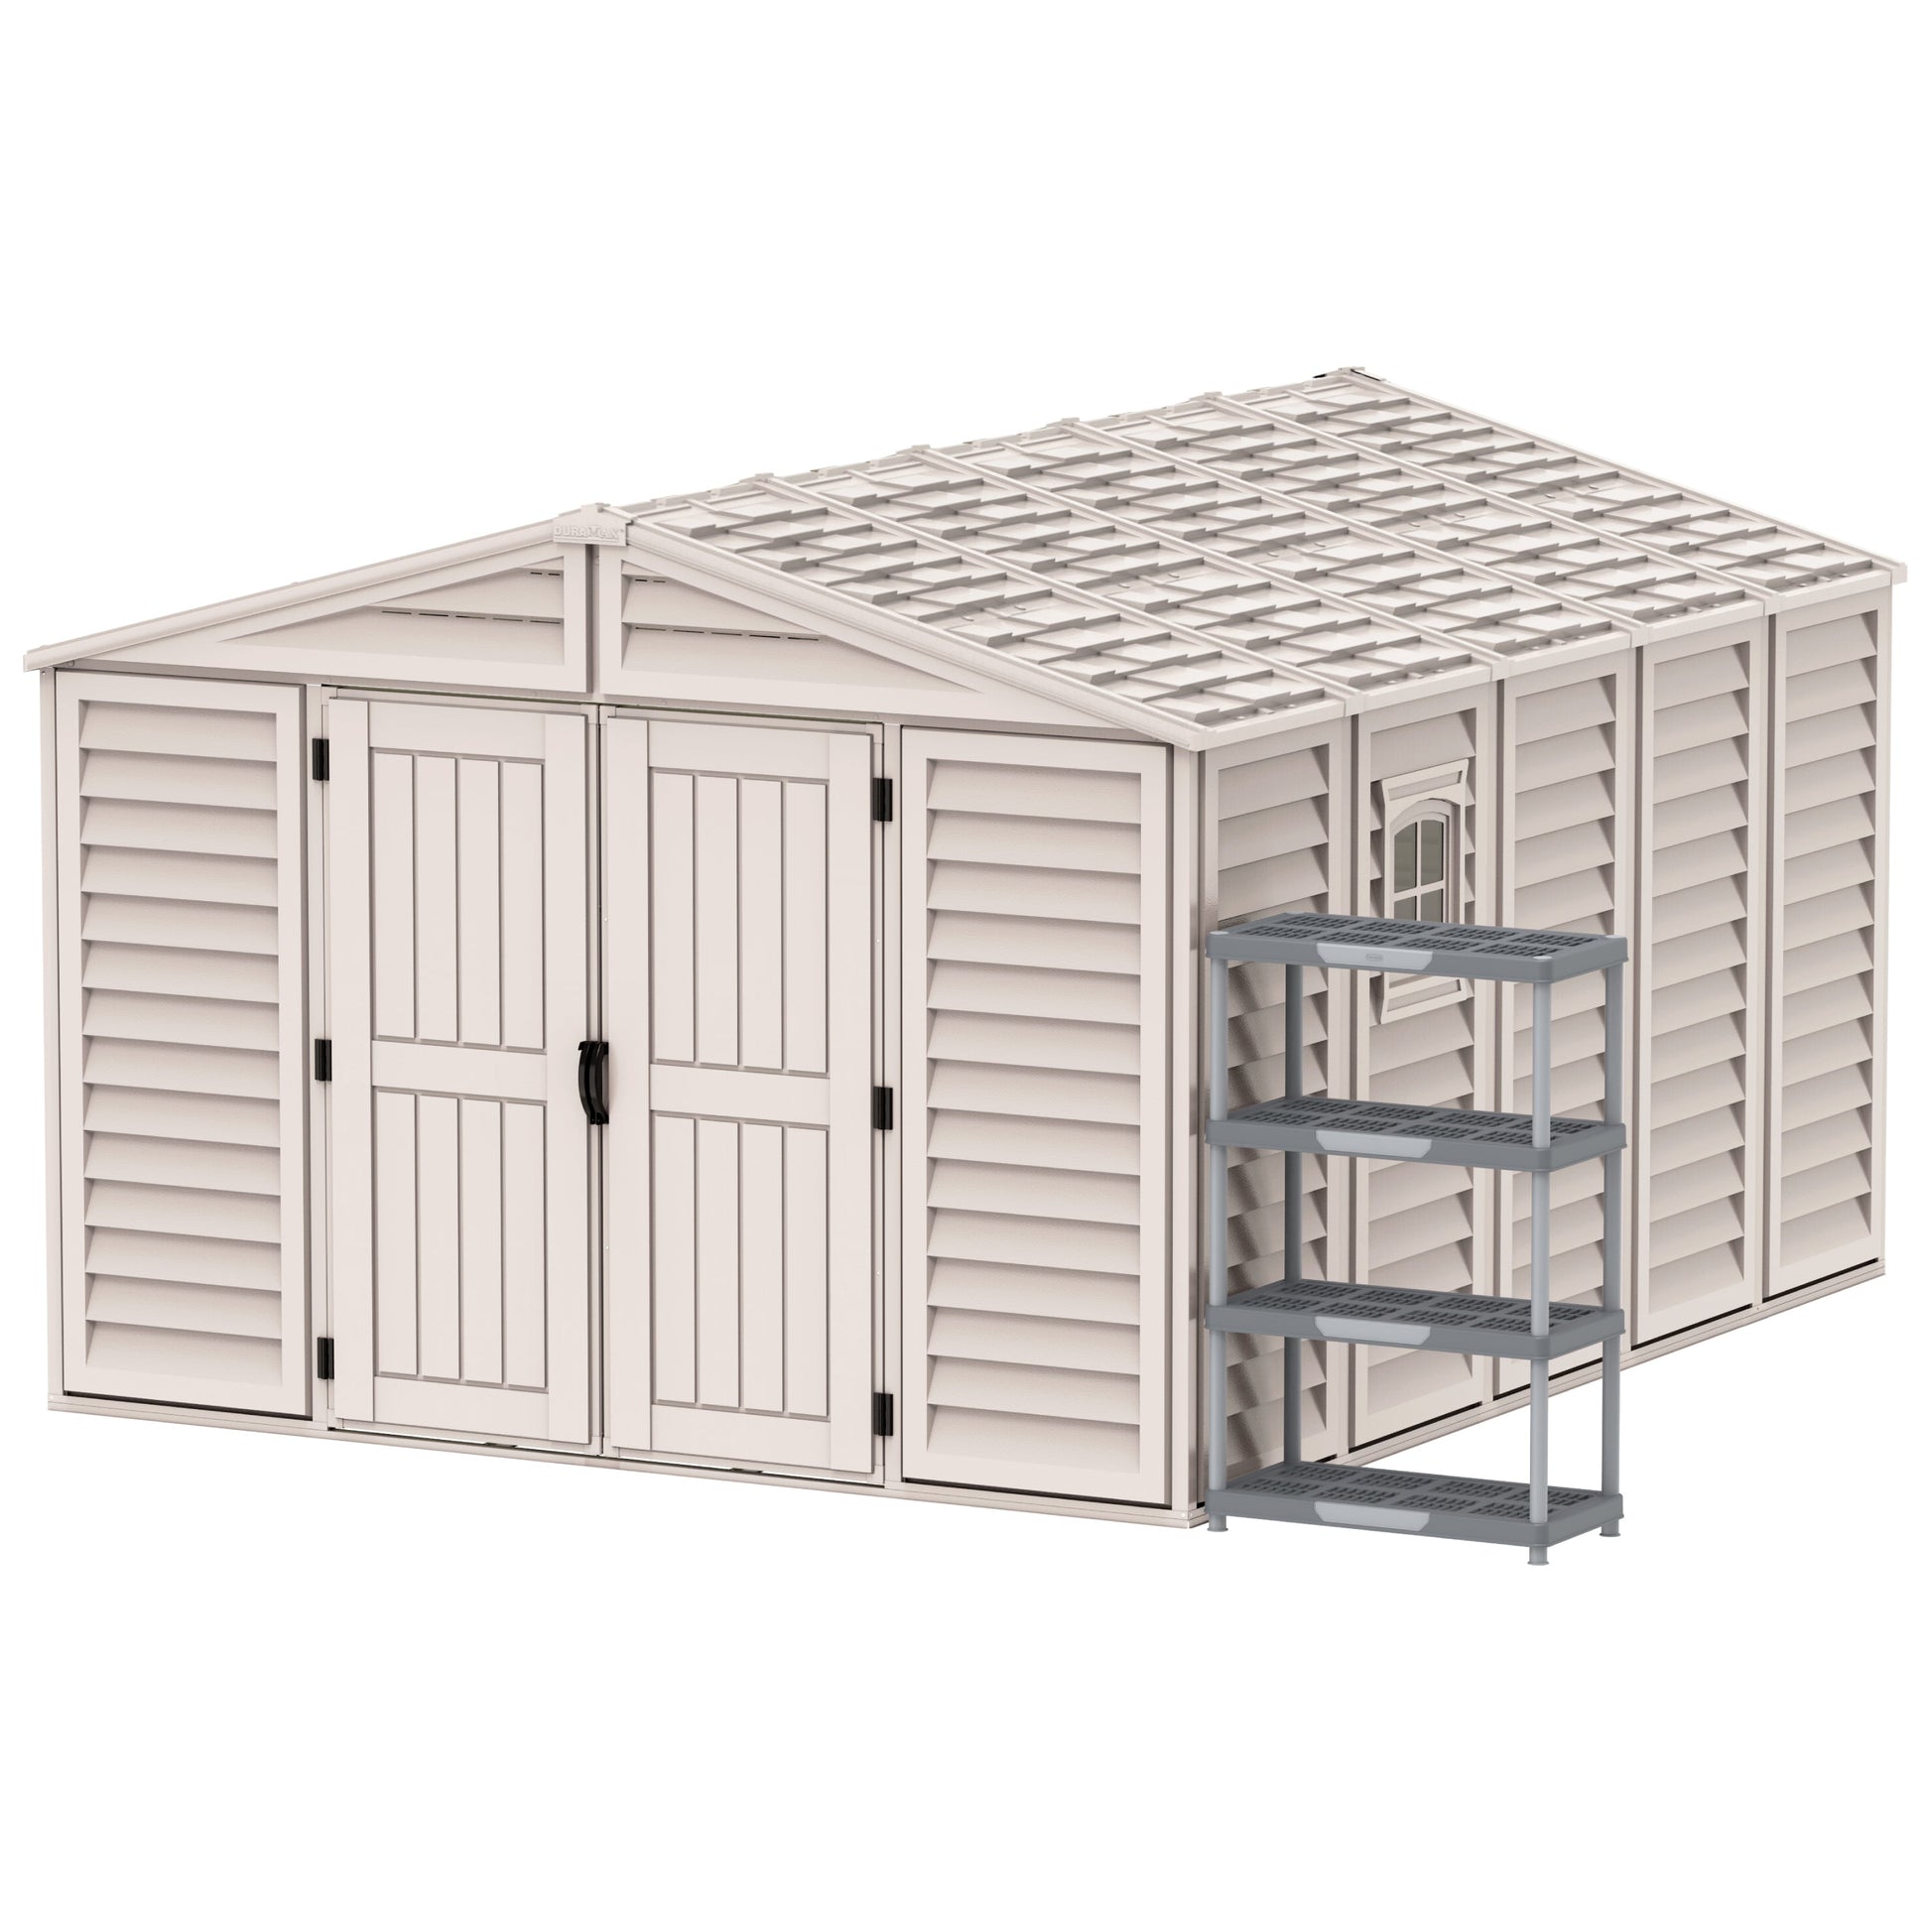 Walk-in Shed 10.5x13ft with FREE Rack- Cosmoplast KSA